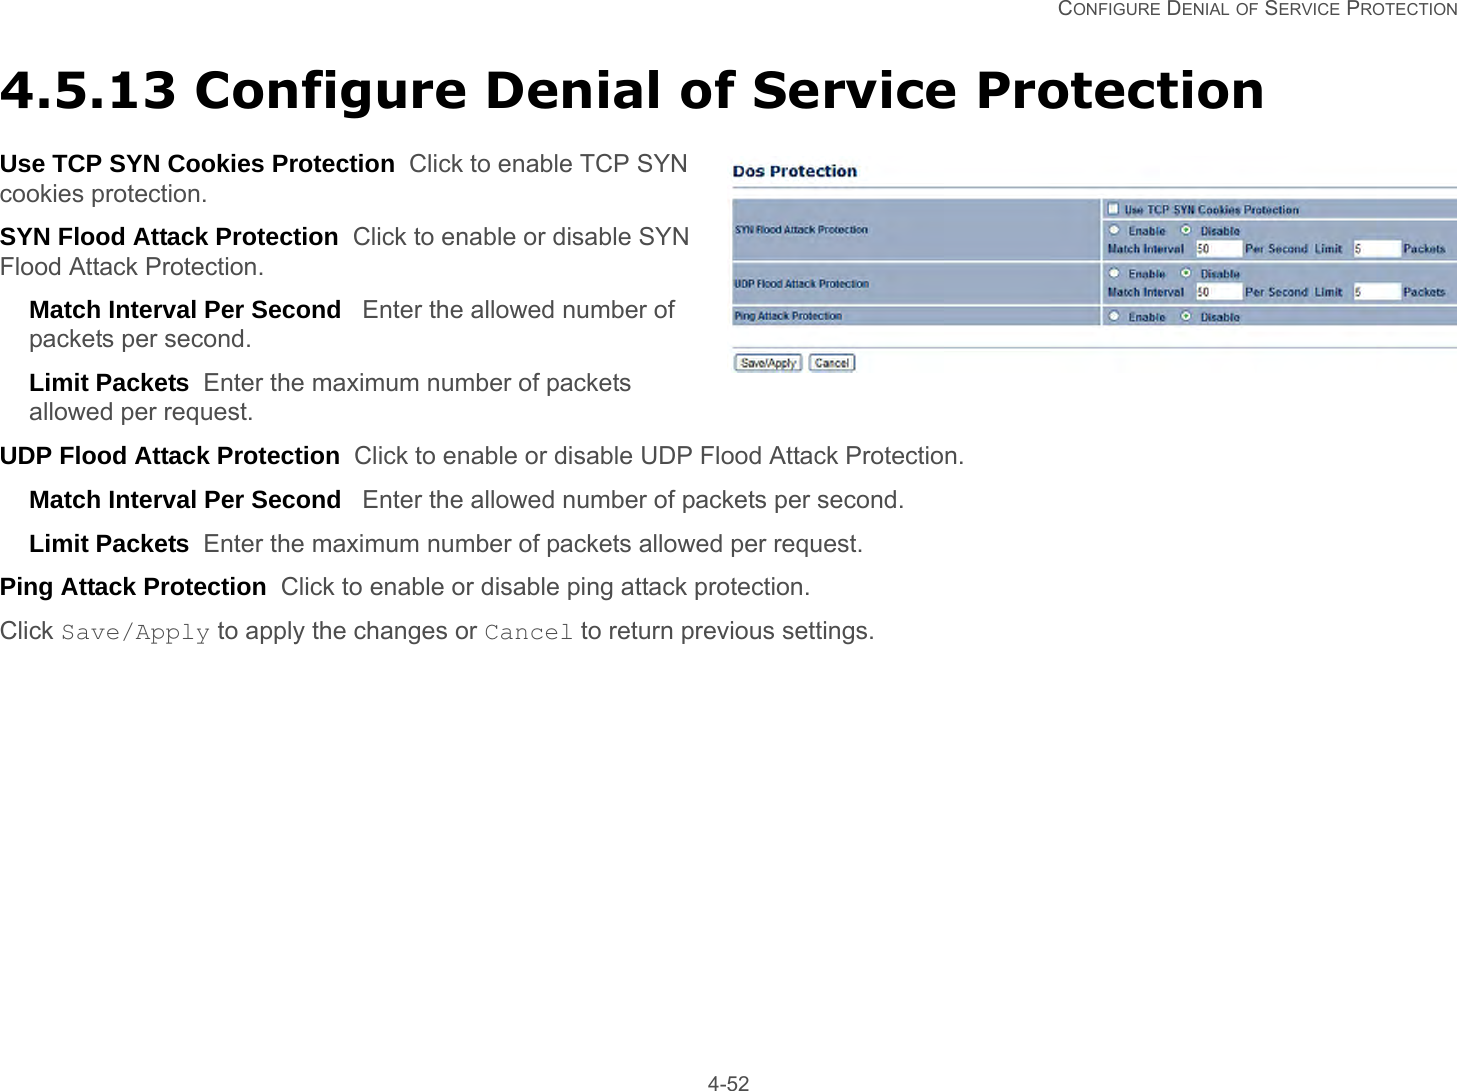   CONFIGURE DENIAL OF SERVICE PROTECTION 4-524.5.13 Configure Denial of Service ProtectionUse TCP SYN Cookies Protection  Click to enable TCP SYN cookies protection.SYN Flood Attack Protection  Click to enable or disable SYN Flood Attack Protection.Match Interval Per Second   Enter the allowed number of packets per second.Limit Packets  Enter the maximum number of packets allowed per request.UDP Flood Attack Protection  Click to enable or disable UDP Flood Attack Protection.Match Interval Per Second   Enter the allowed number of packets per second.Limit Packets  Enter the maximum number of packets allowed per request.Ping Attack Protection  Click to enable or disable ping attack protection.Click Save/Apply to apply the changes or Cancel to return previous settings.